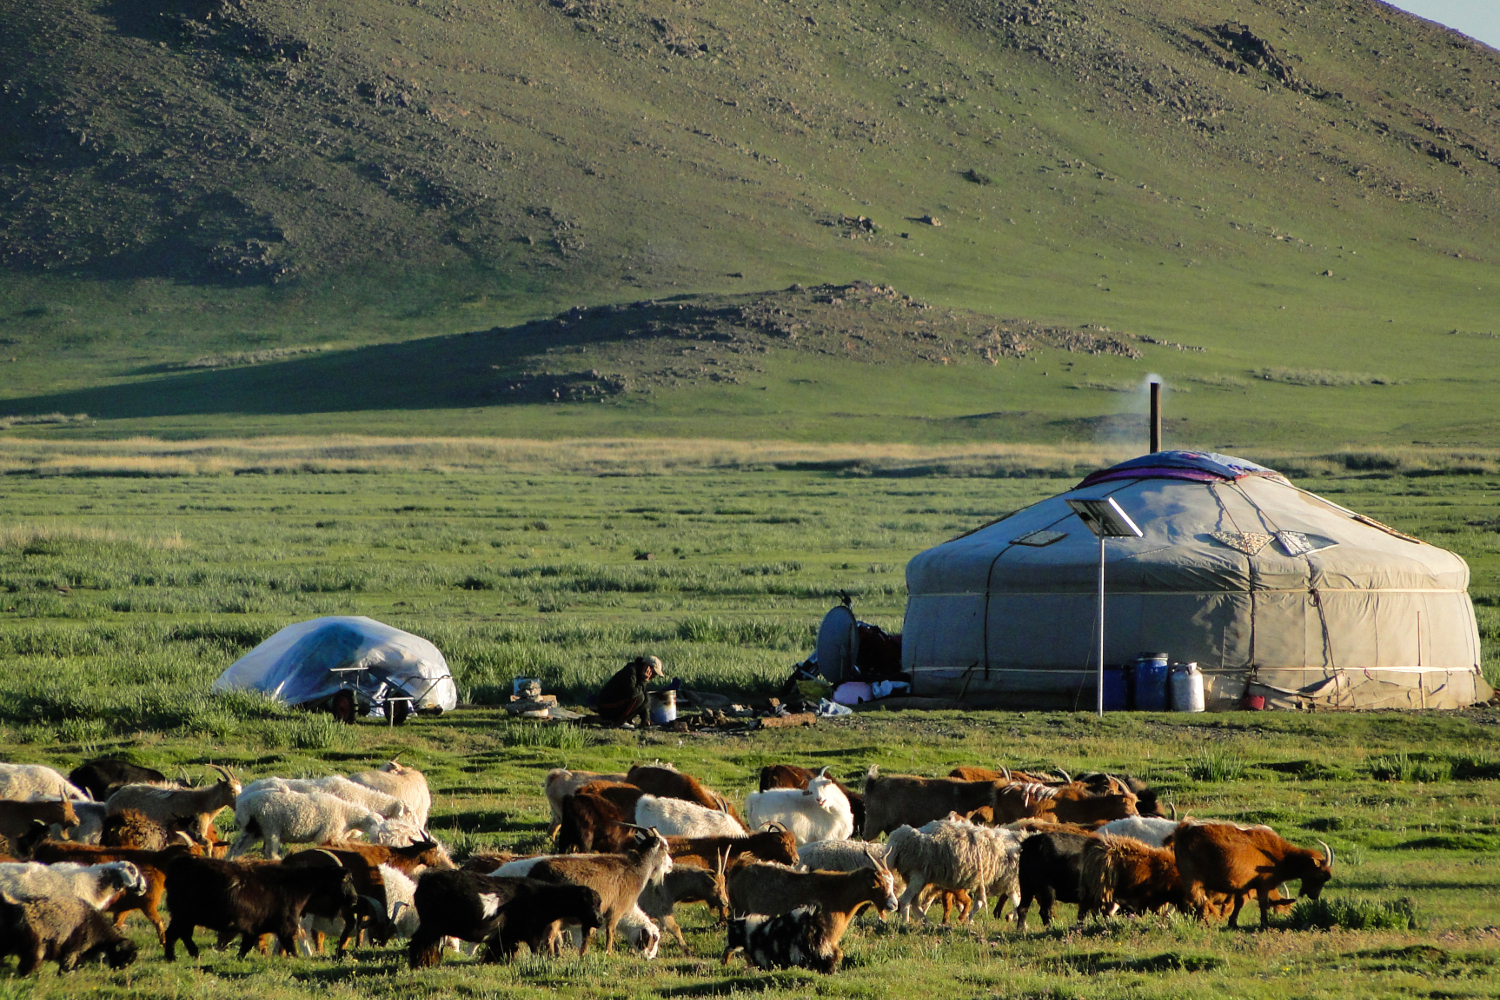 Most road-trippers stay in a ger camp with local nomads. Image by Stephen Lioy / Lonely Planet